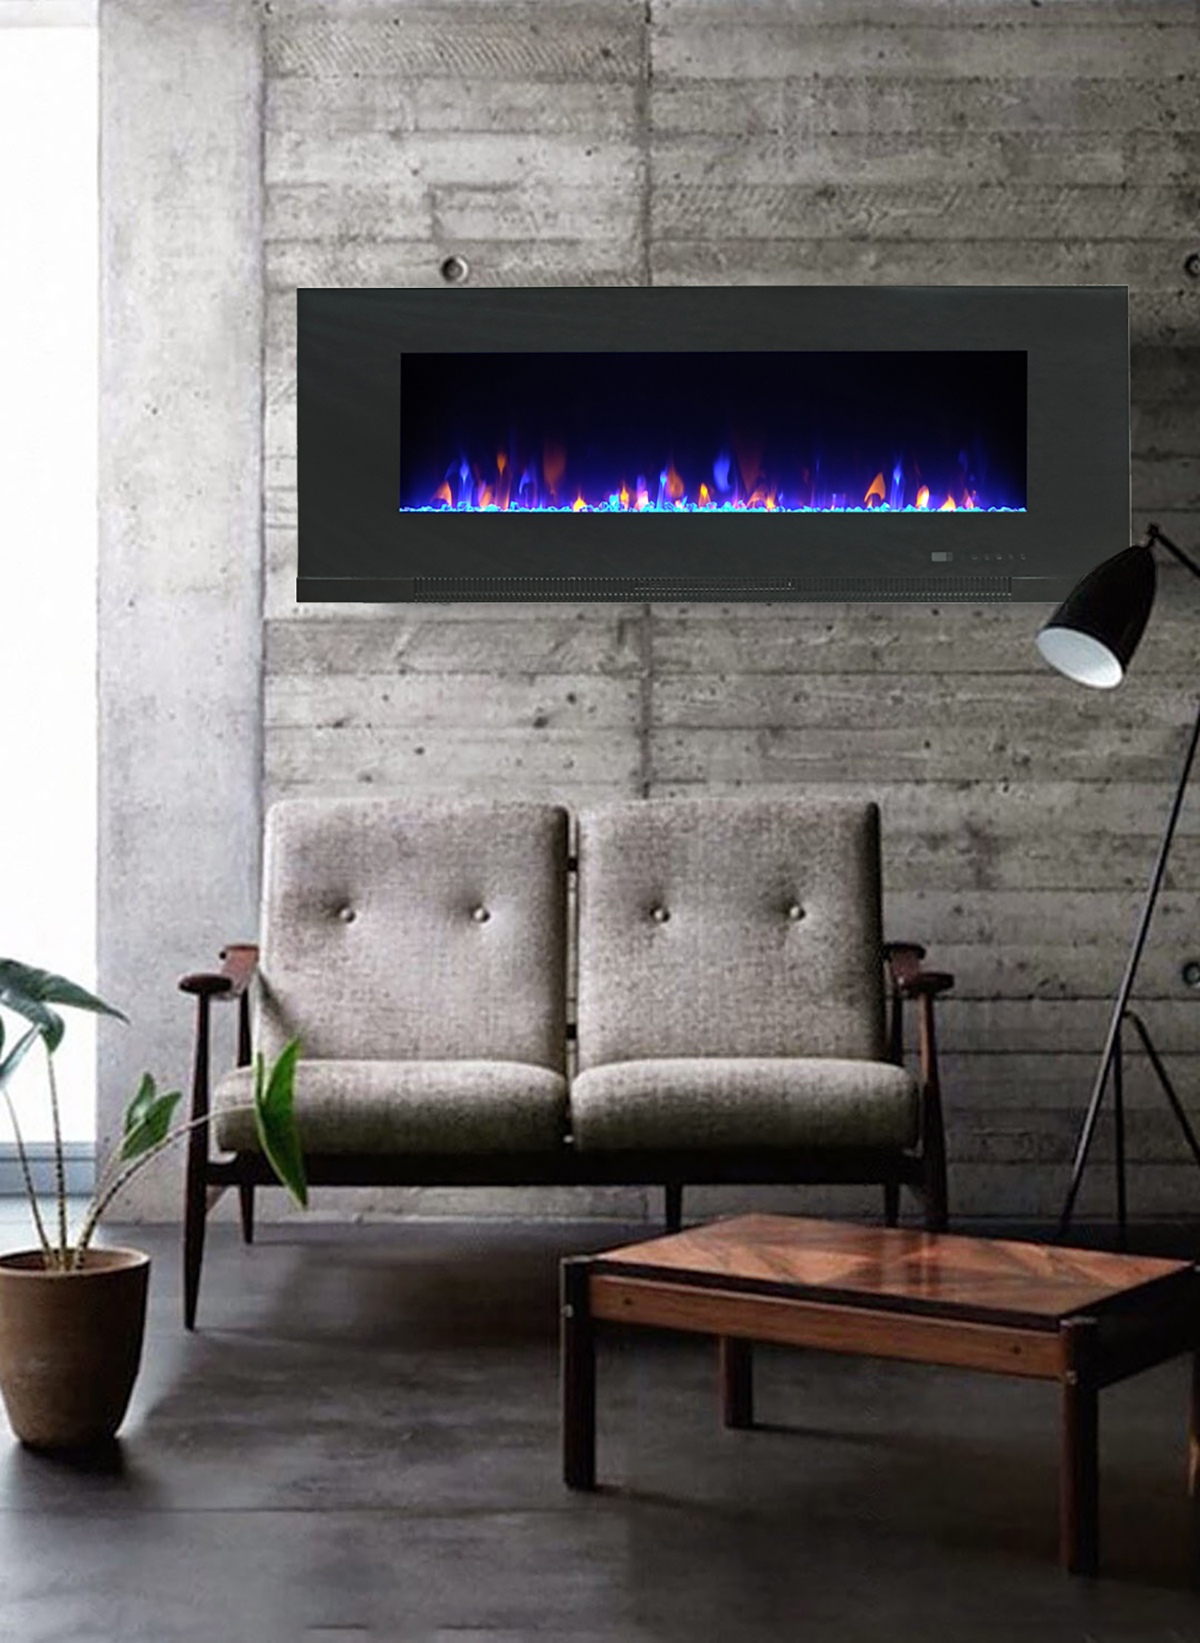 Wall Mount Fireplace Lowes Awesome Paramount Mirage Wall Mount 20 08 In X 50 In Black Electric Fireplace